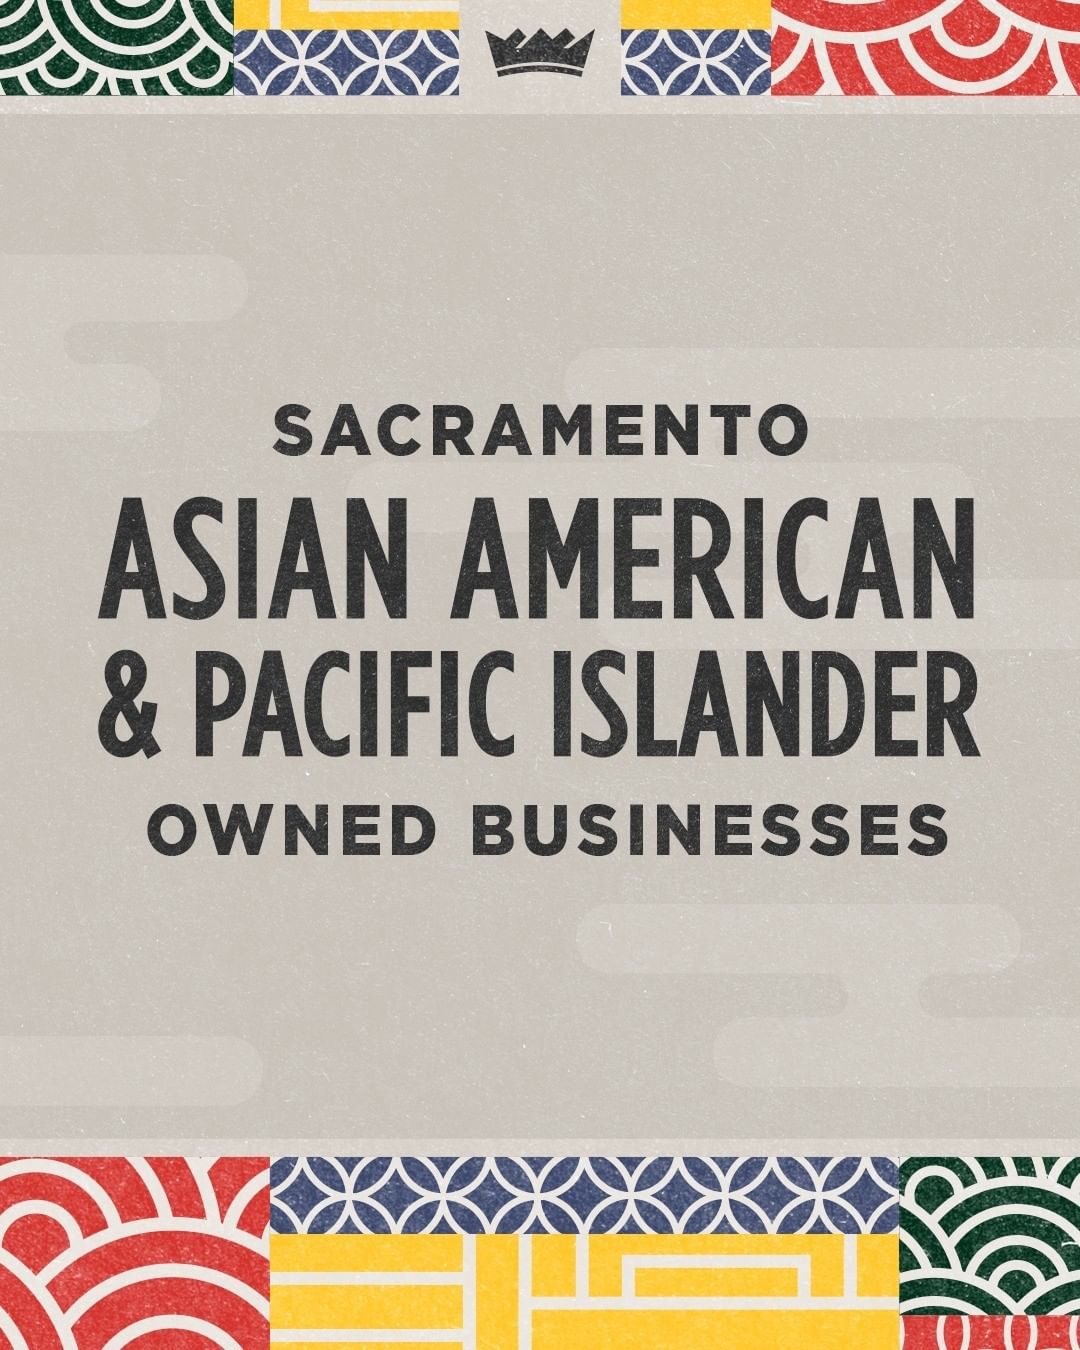 In honor of #AAPIHeritageMonth, we're highlighting local AAPI-owned businesses! ...